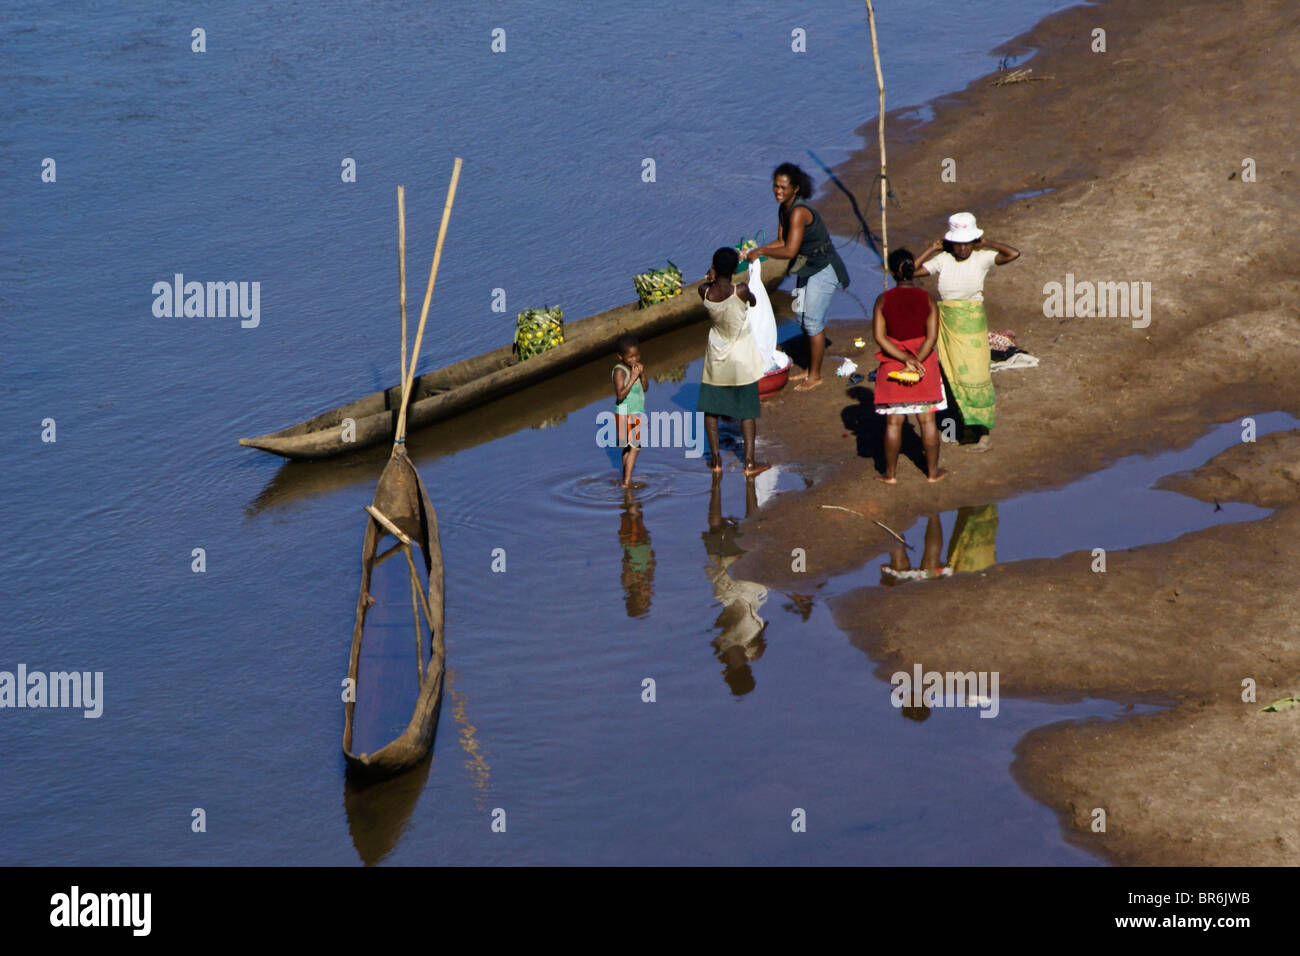 Malagasy people at river, Madagascar Stock Photo